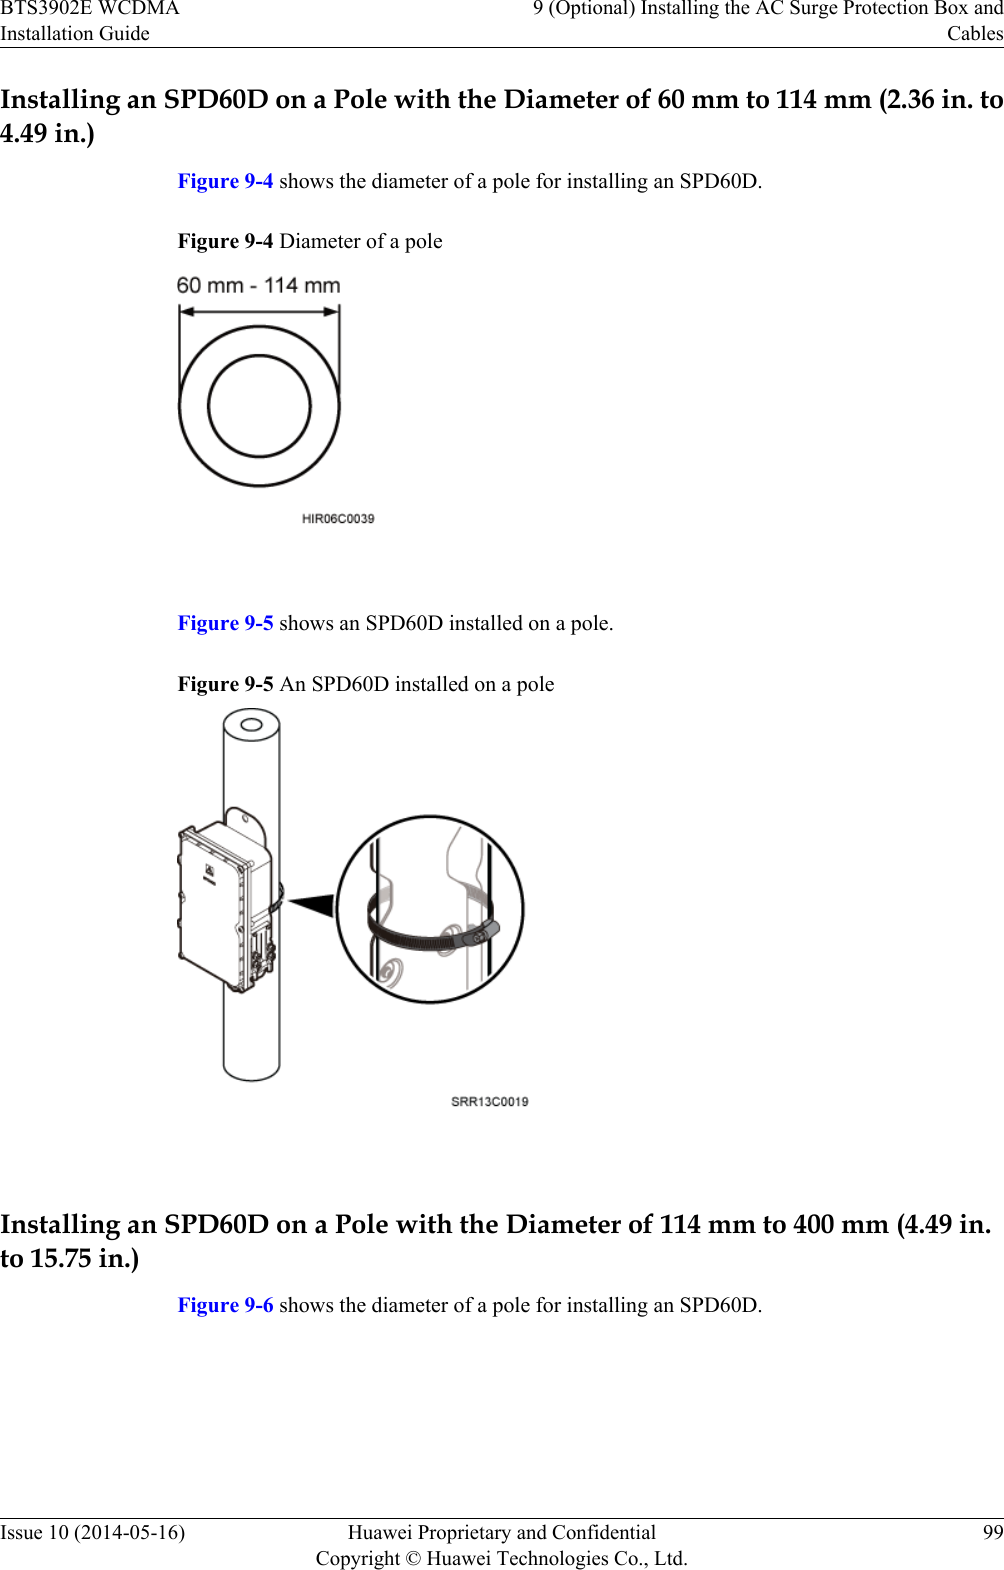 Installing an SPD60D on a Pole with the Diameter of 60 mm to 114 mm (2.36 in. to4.49 in.)Figure 9-4 shows the diameter of a pole for installing an SPD60D.Figure 9-4 Diameter of a pole Figure 9-5 shows an SPD60D installed on a pole.Figure 9-5 An SPD60D installed on a pole Installing an SPD60D on a Pole with the Diameter of 114 mm to 400 mm (4.49 in.to 15.75 in.)Figure 9-6 shows the diameter of a pole for installing an SPD60D.BTS3902E WCDMAInstallation Guide9 (Optional) Installing the AC Surge Protection Box andCablesIssue 10 (2014-05-16) Huawei Proprietary and ConfidentialCopyright © Huawei Technologies Co., Ltd.99